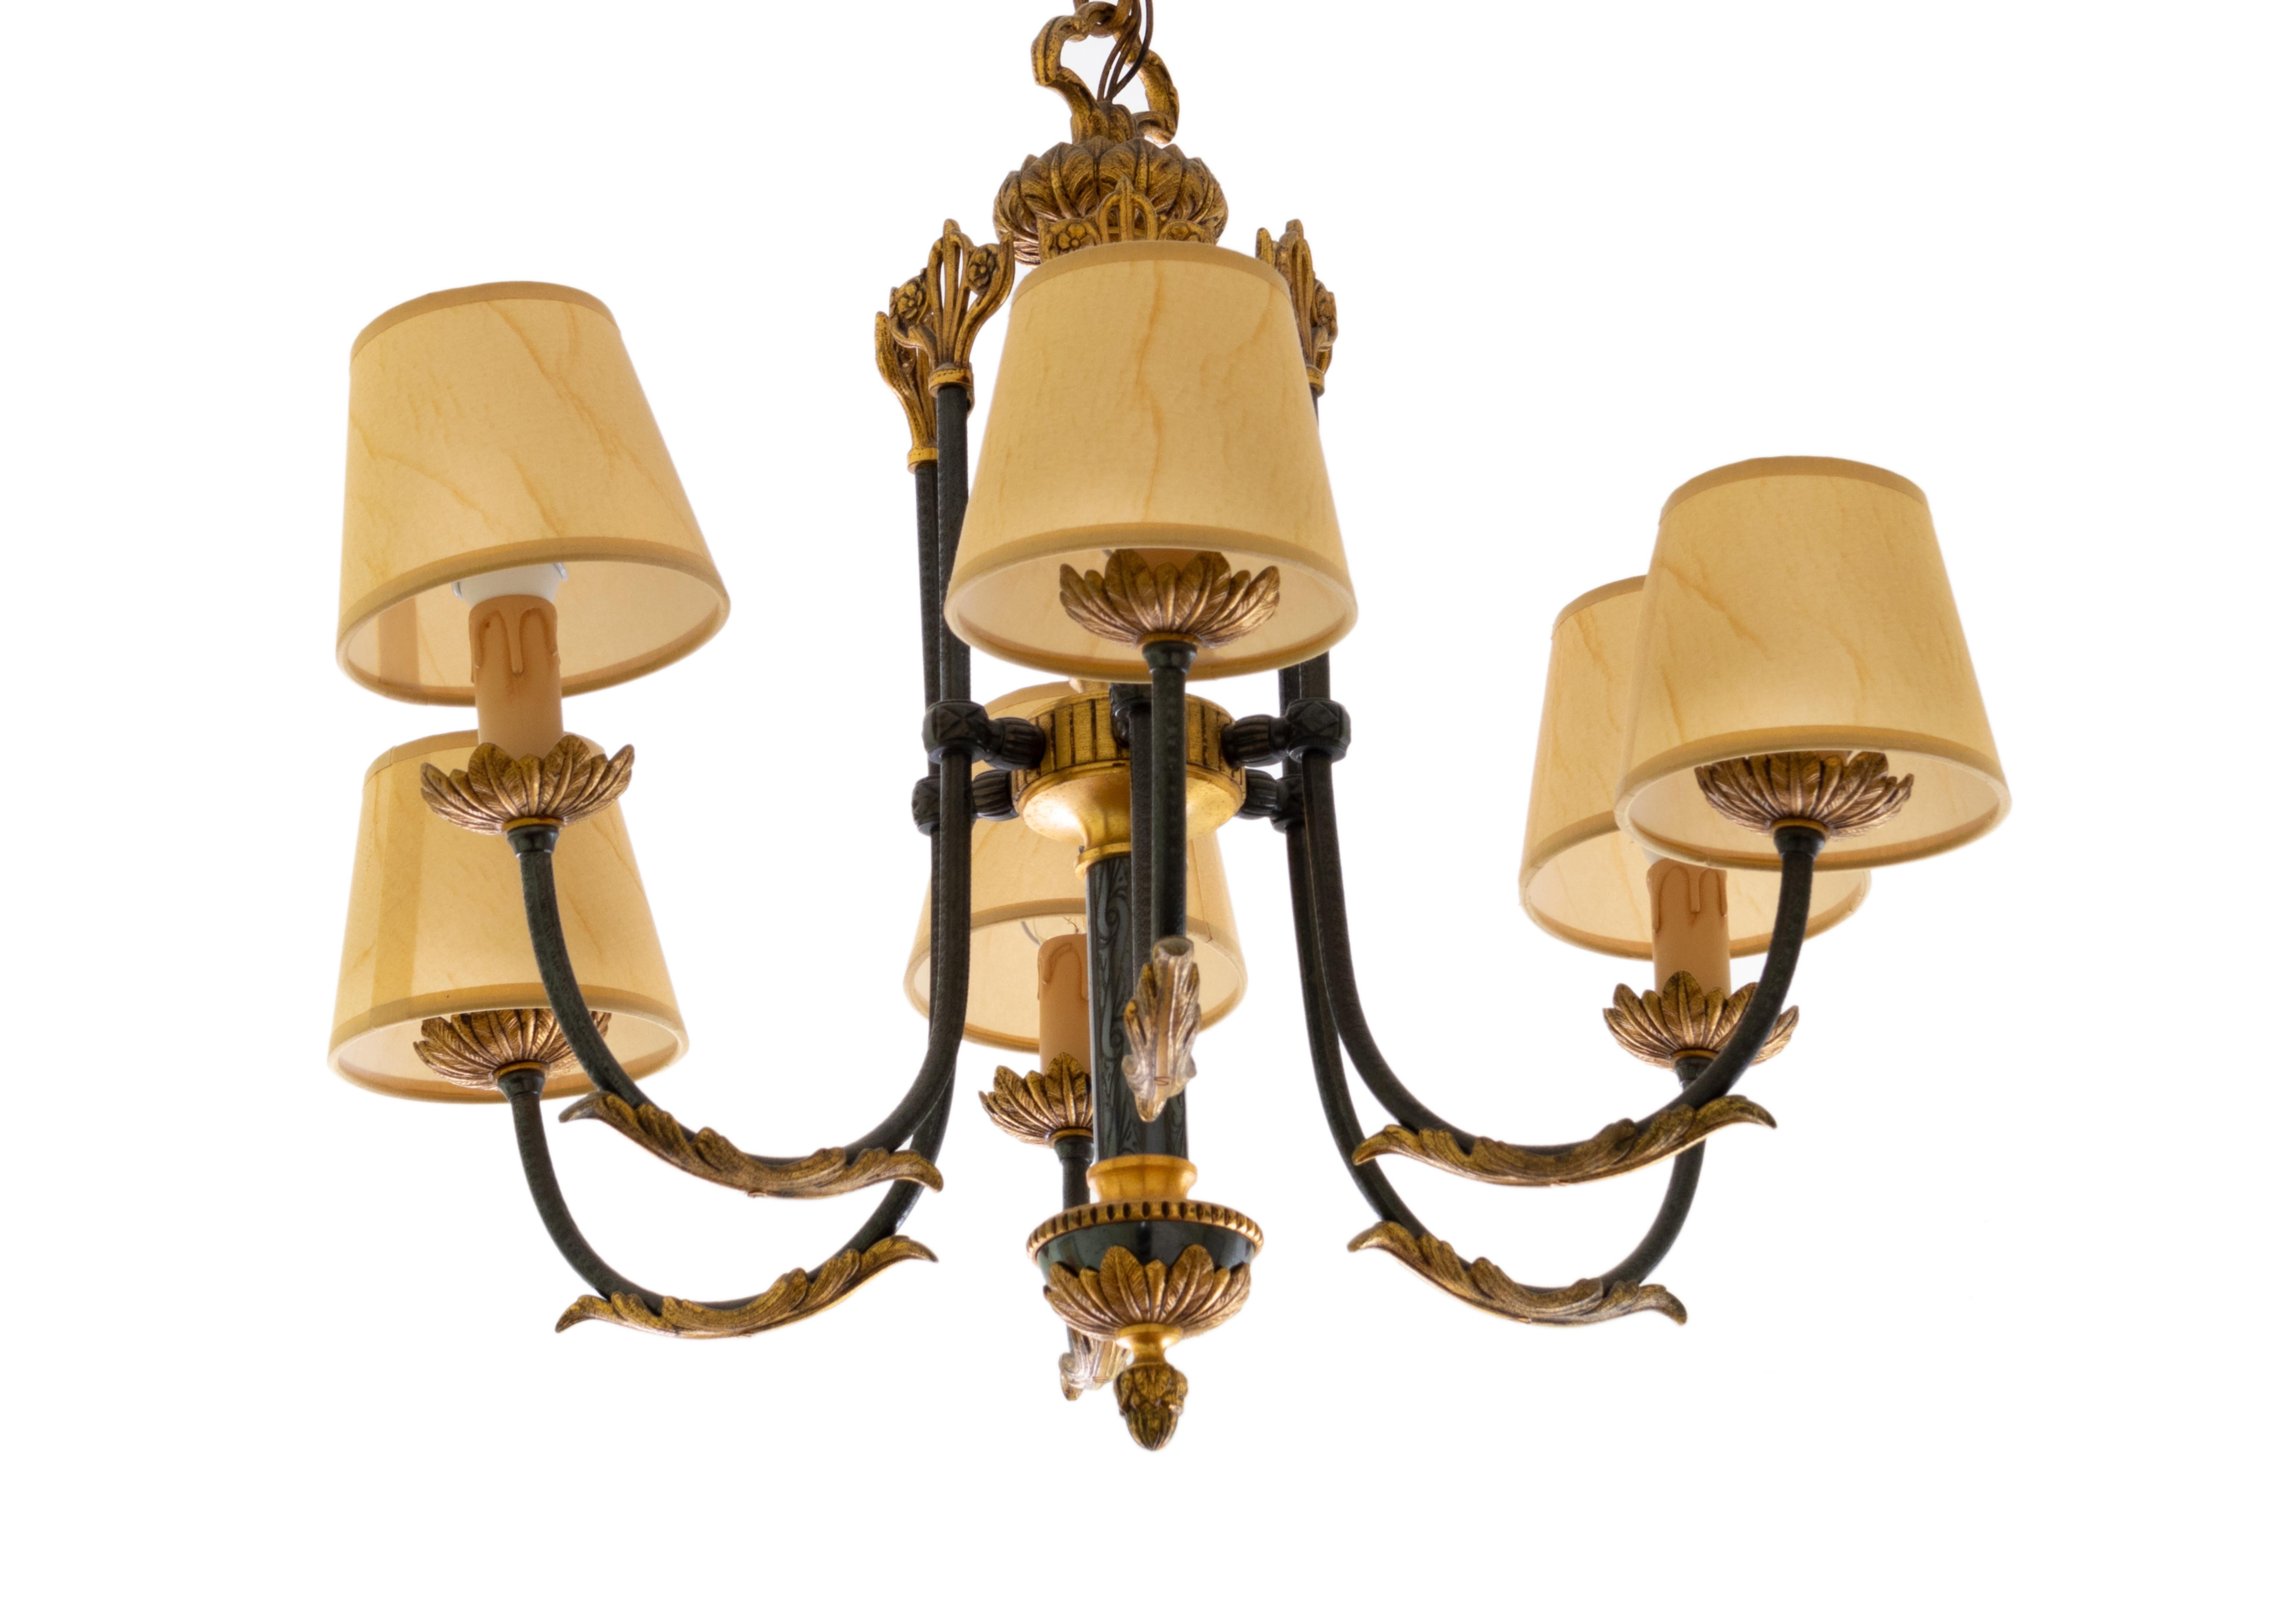 The fully adorned bronze and gilded metal chandelier boasts six arms, gillded chains, each adorned with a lamp. It features six points of light in a sleek black finish, accompanied by individual fabric lampshades, a twist of french Louis XIV style